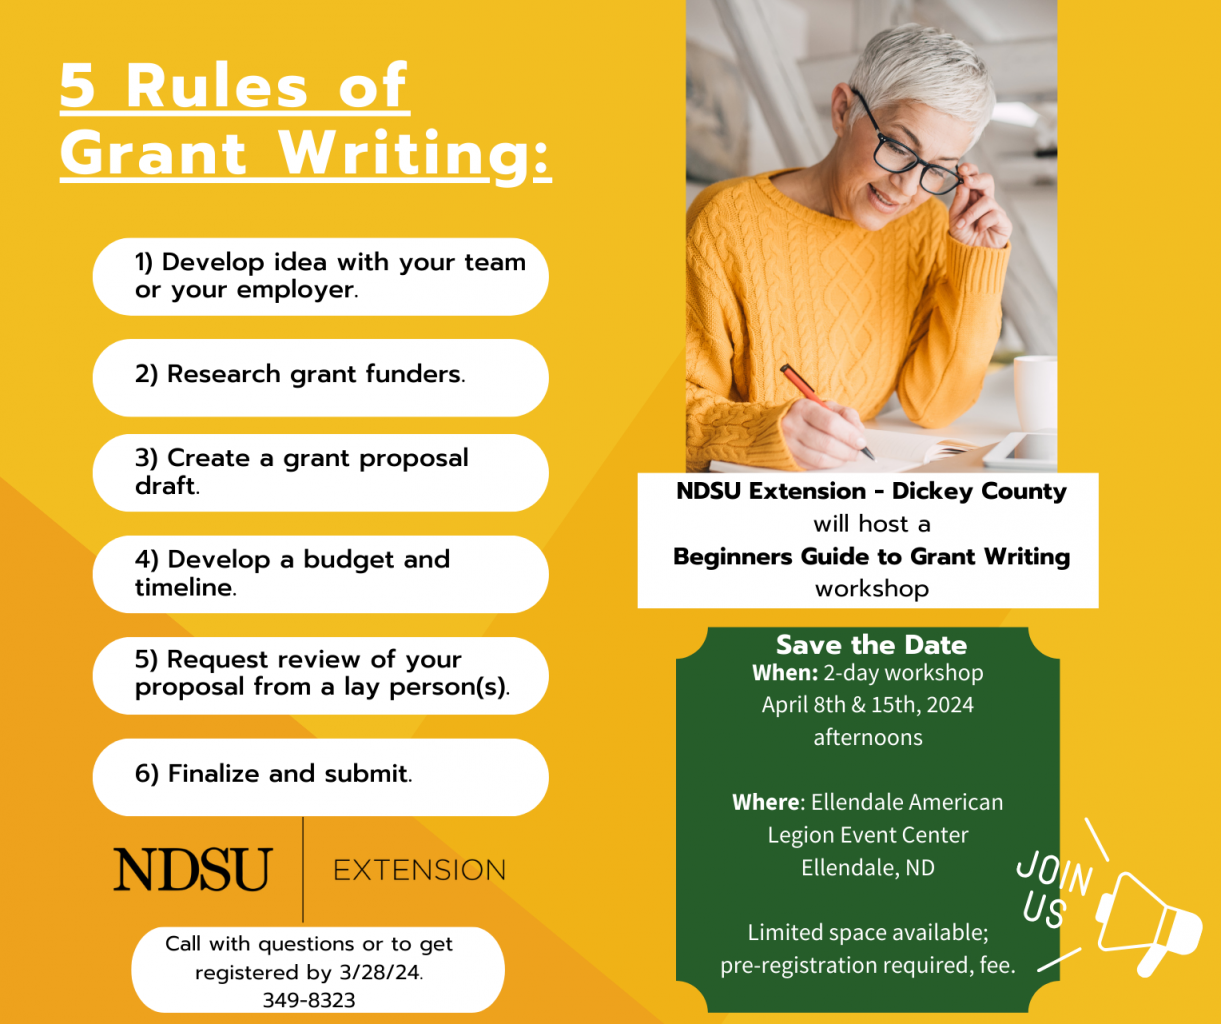 5 Rules of Grant Writing